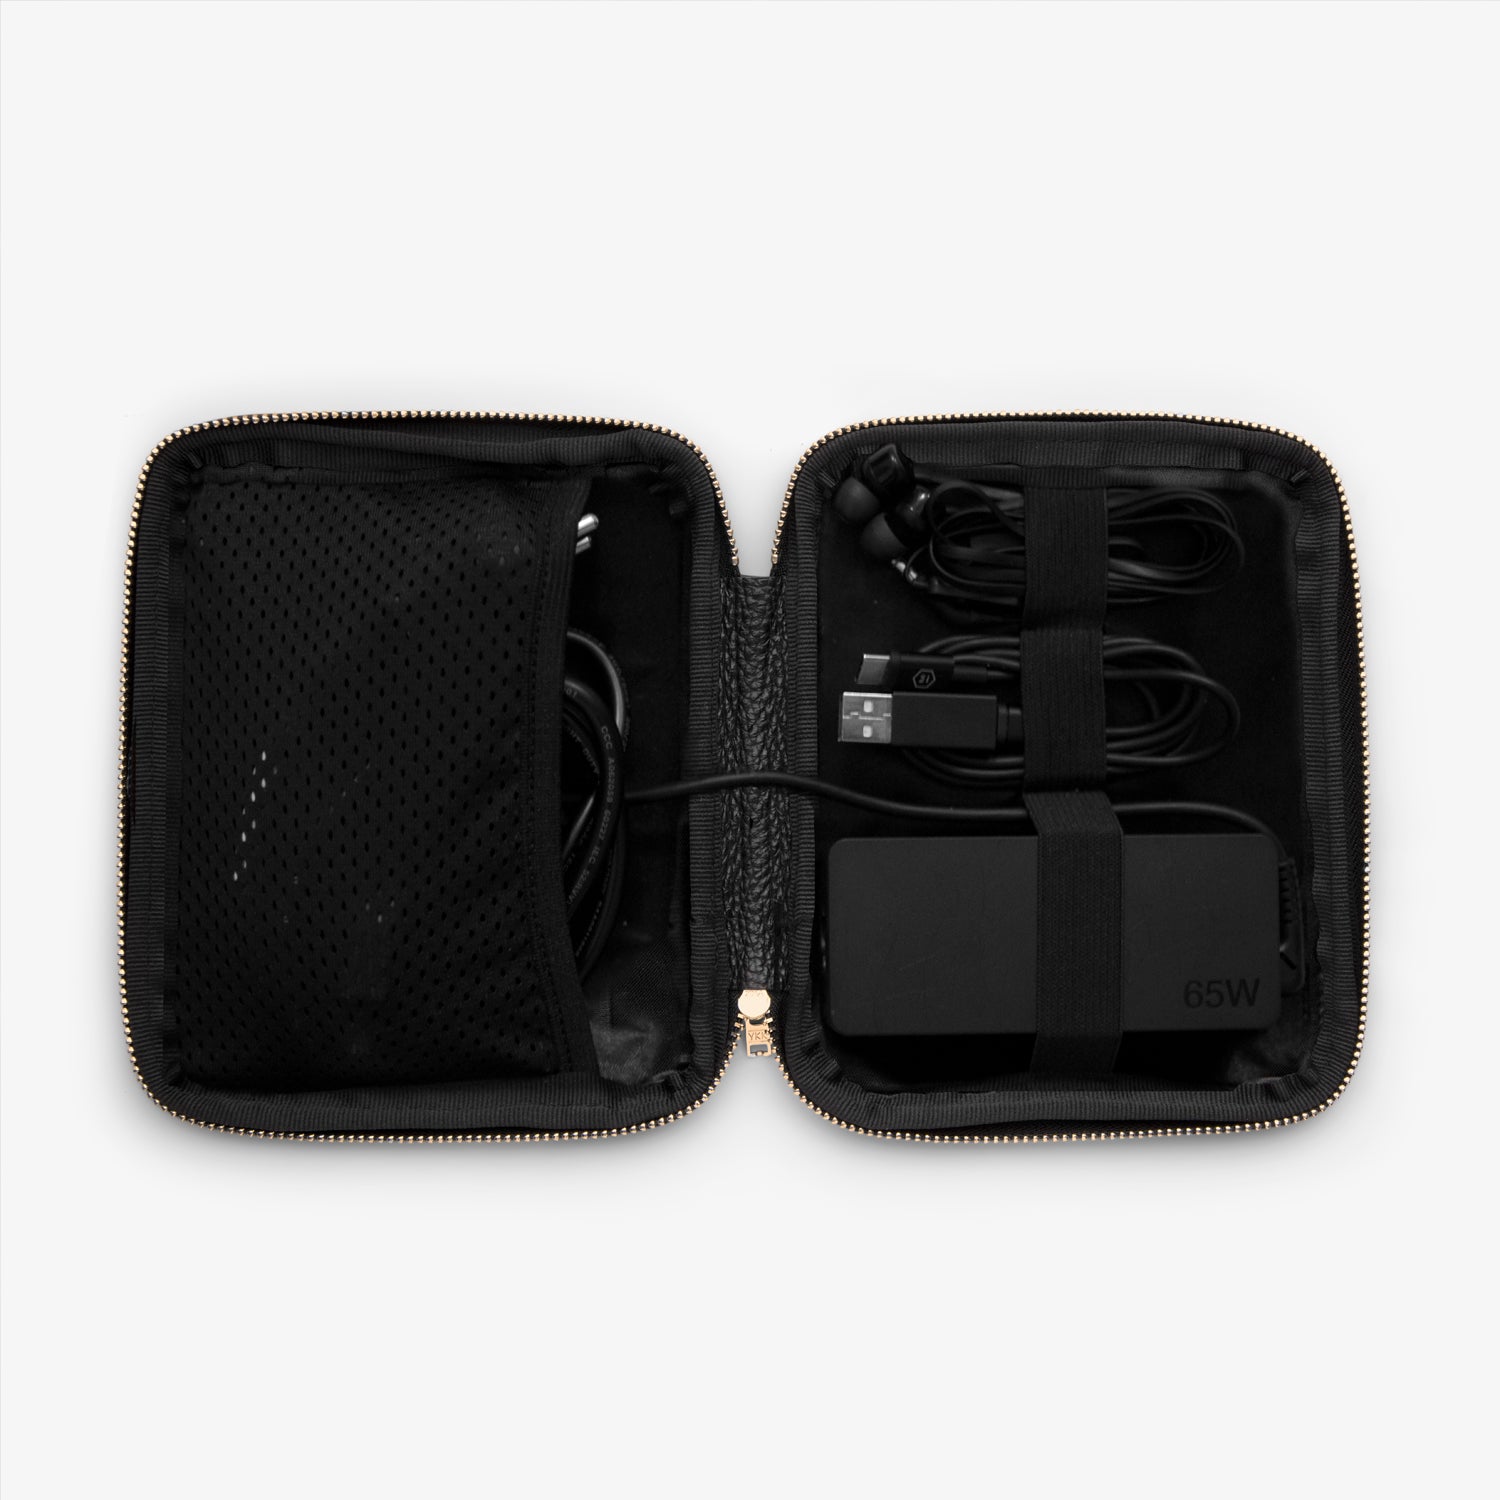 Shows the inside of a cable pocket displaying a computer charger, a phone charger, headphones and other cables, all neatly arranged and organized for easy access while on the go.